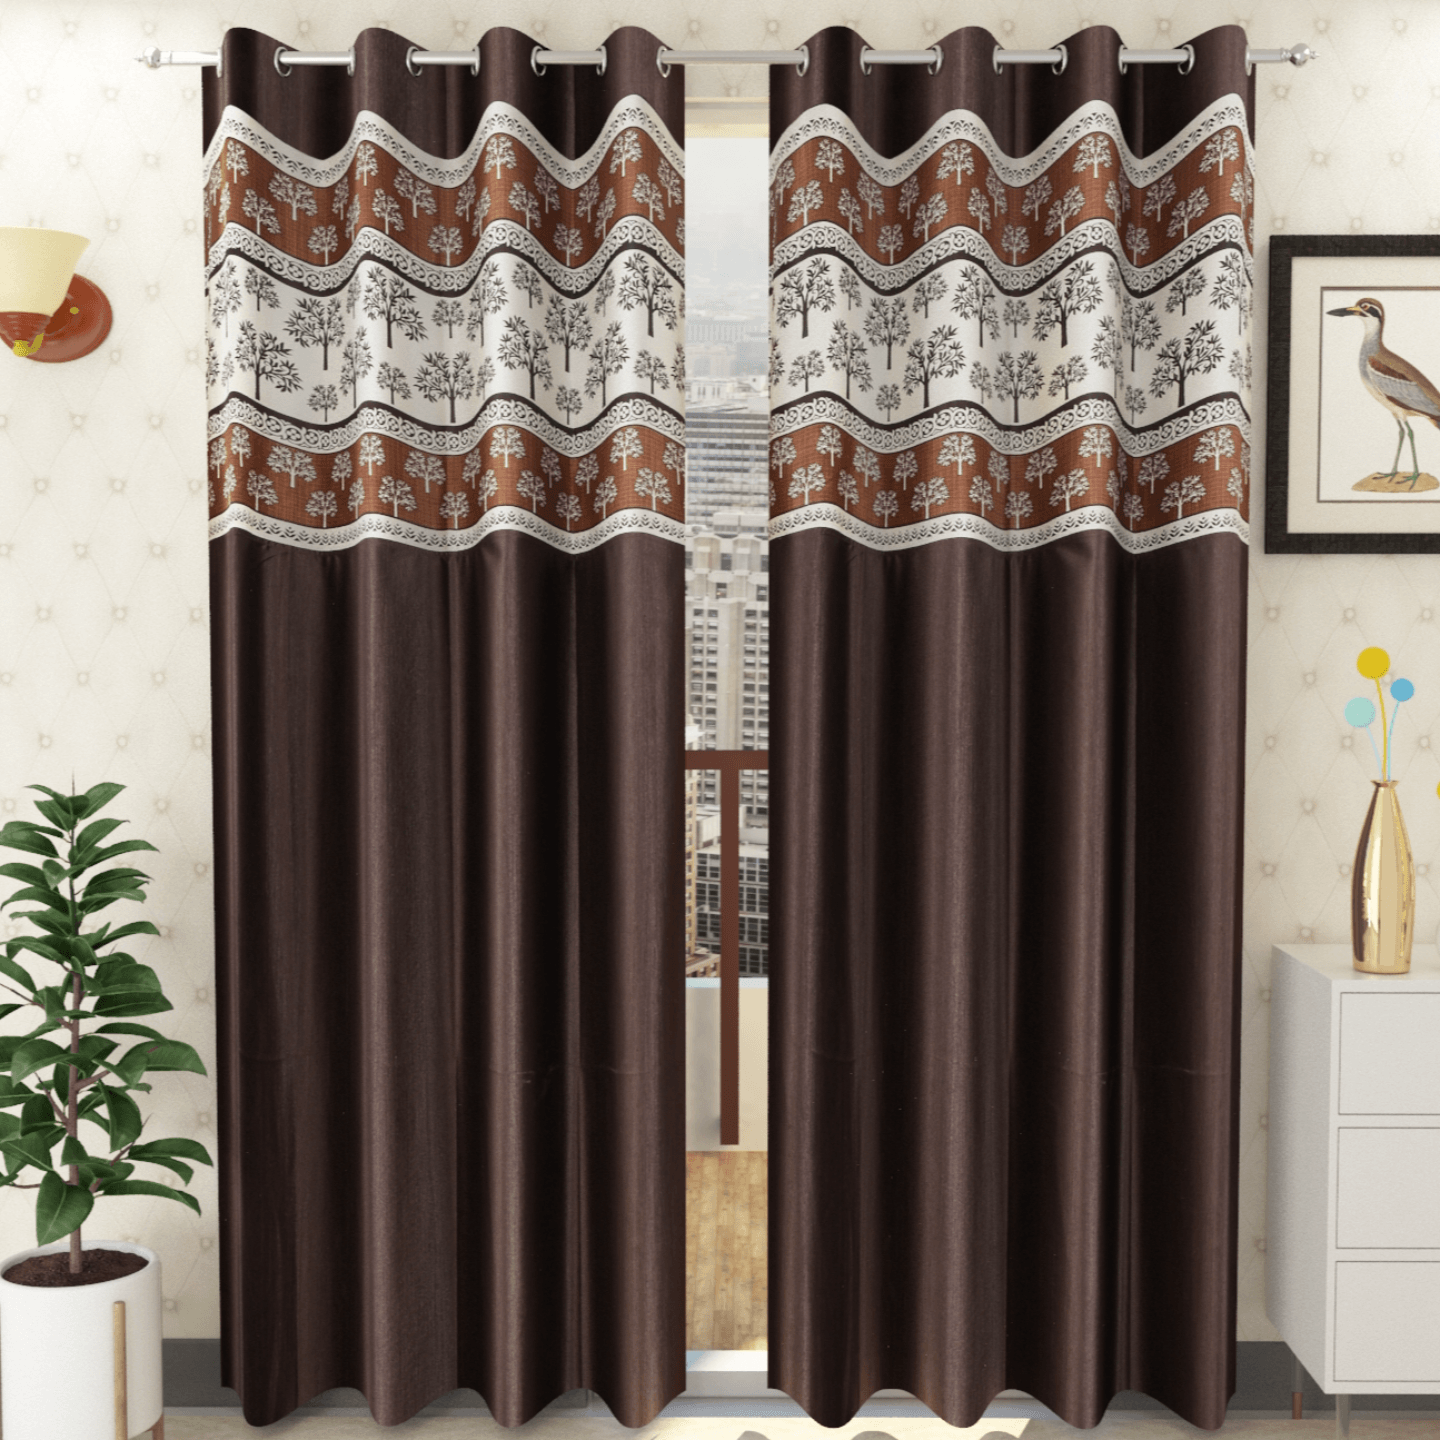 Handtex Home Tree design Patchwork curtain for door 9 feet set of 2pc Coffee color